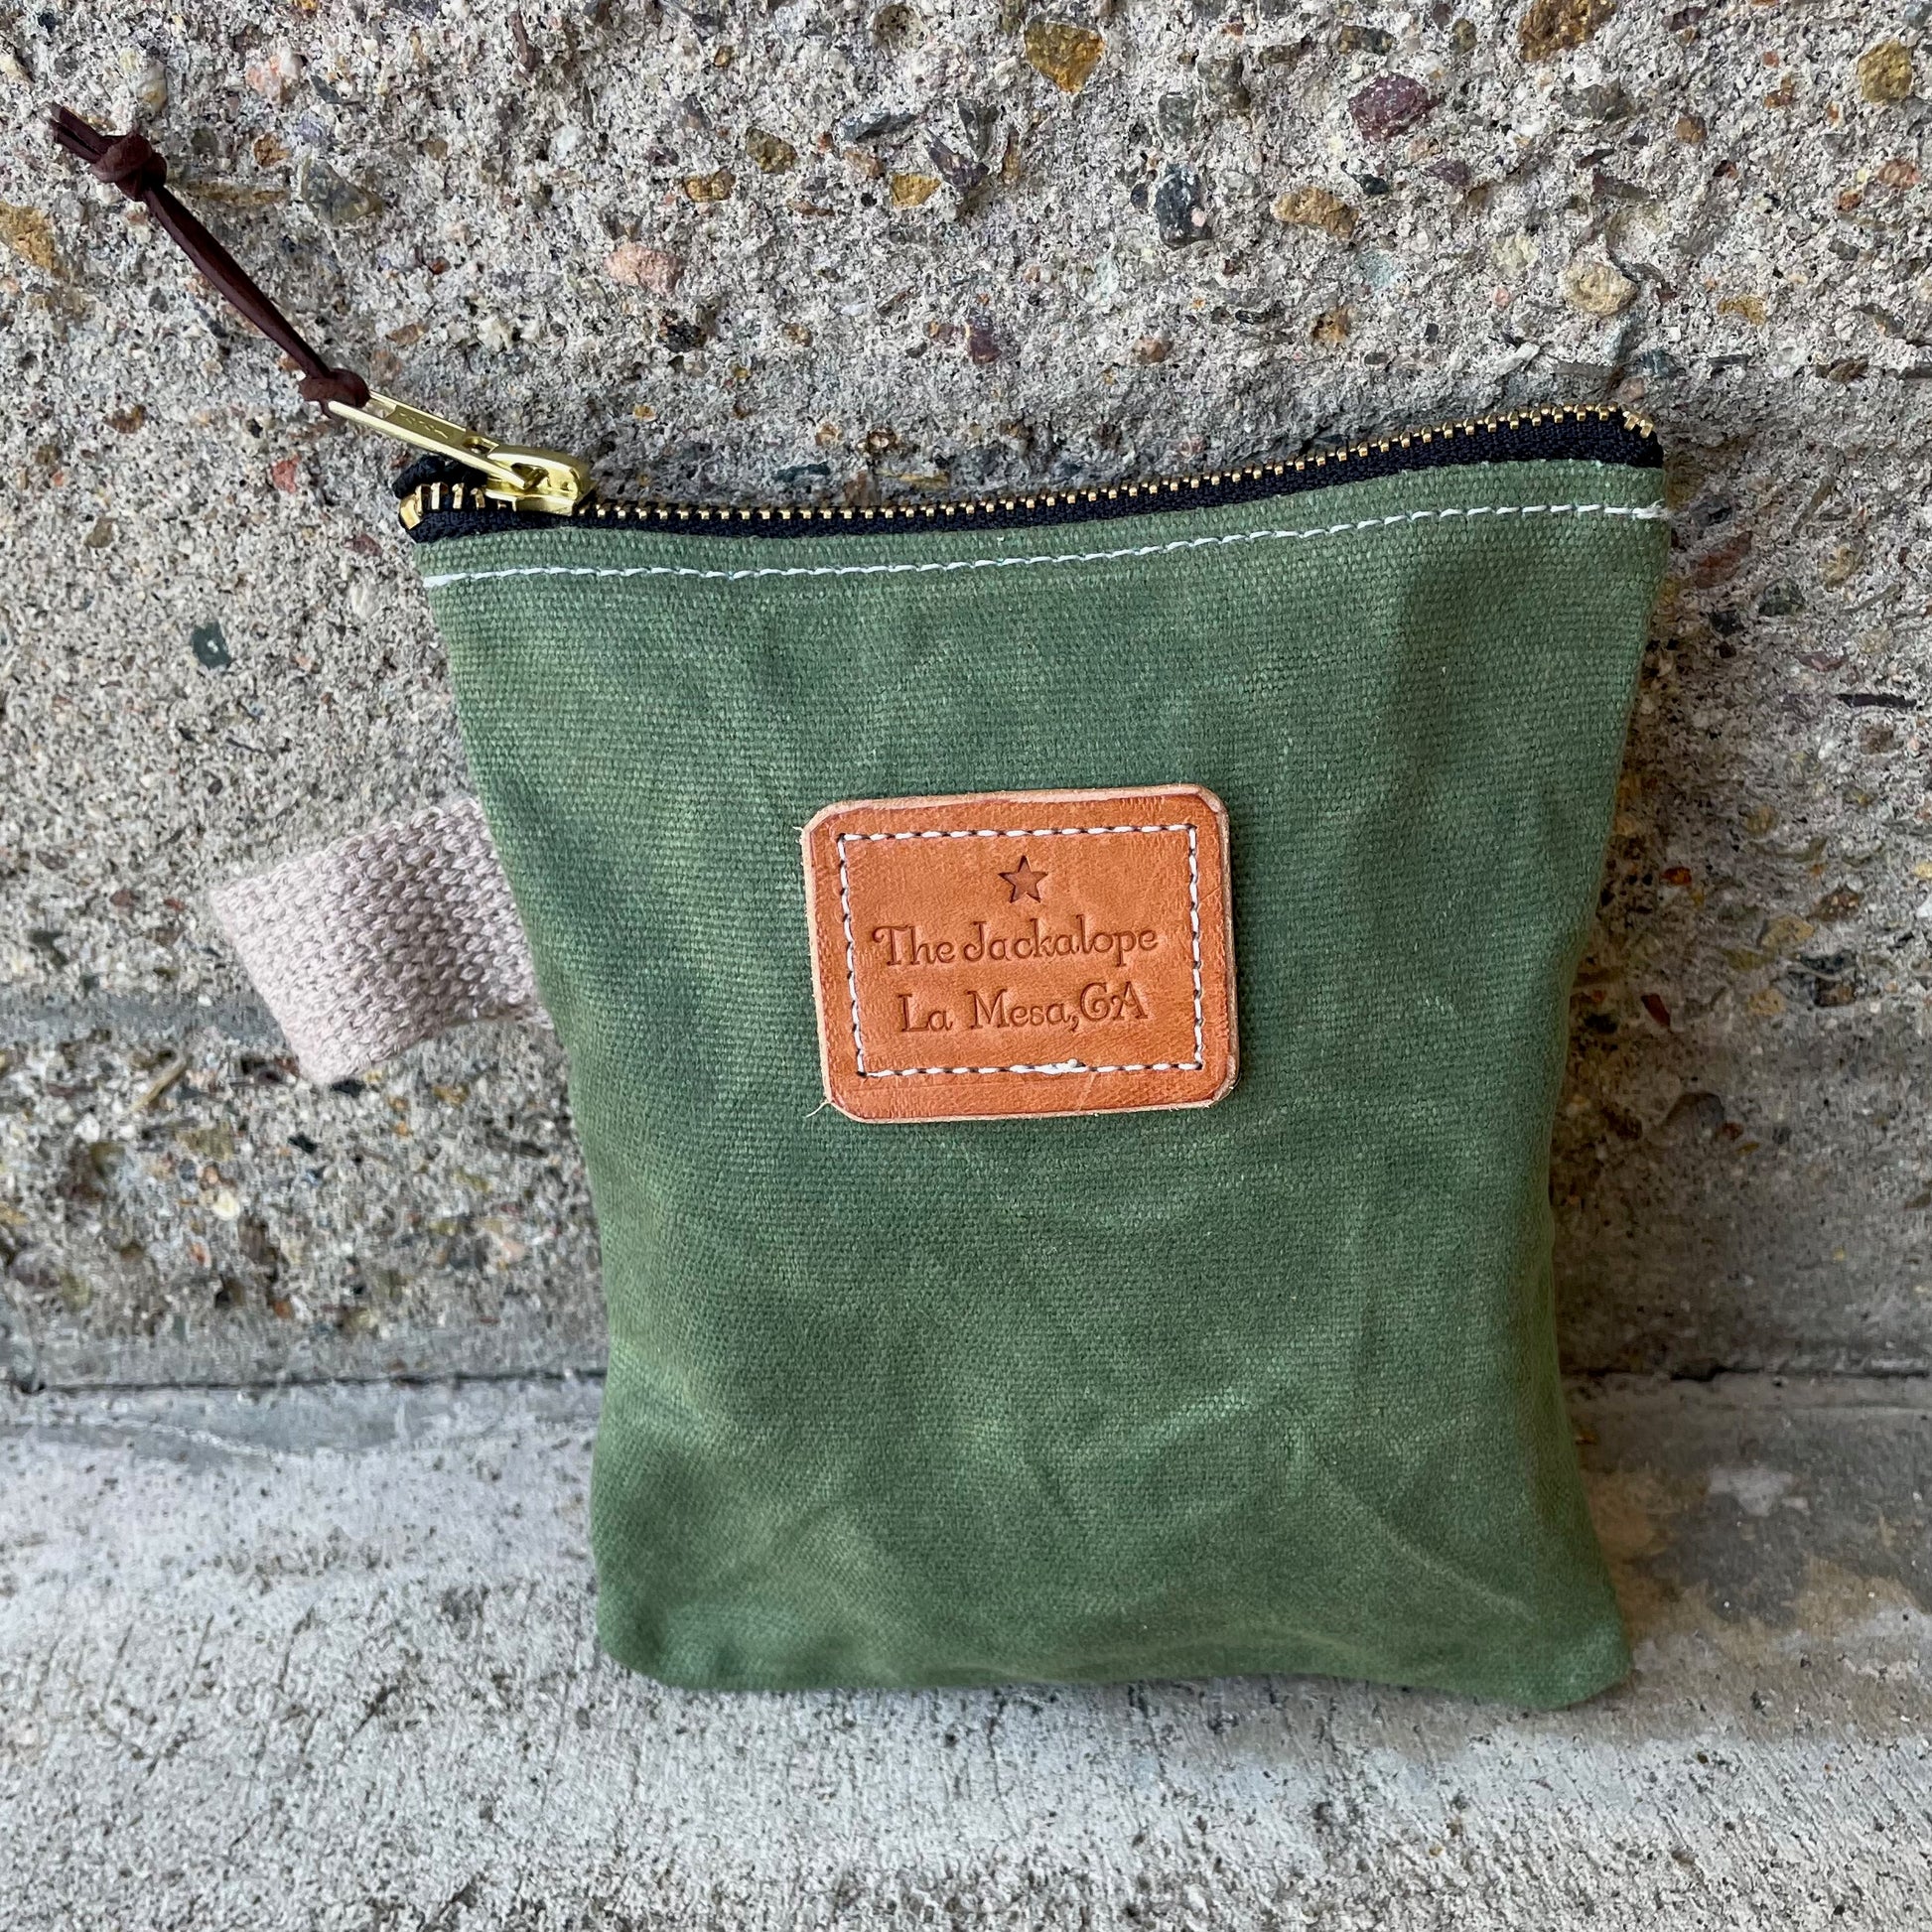 Small Ditty Bag made of waxed canvas with a zipper and a small handle.